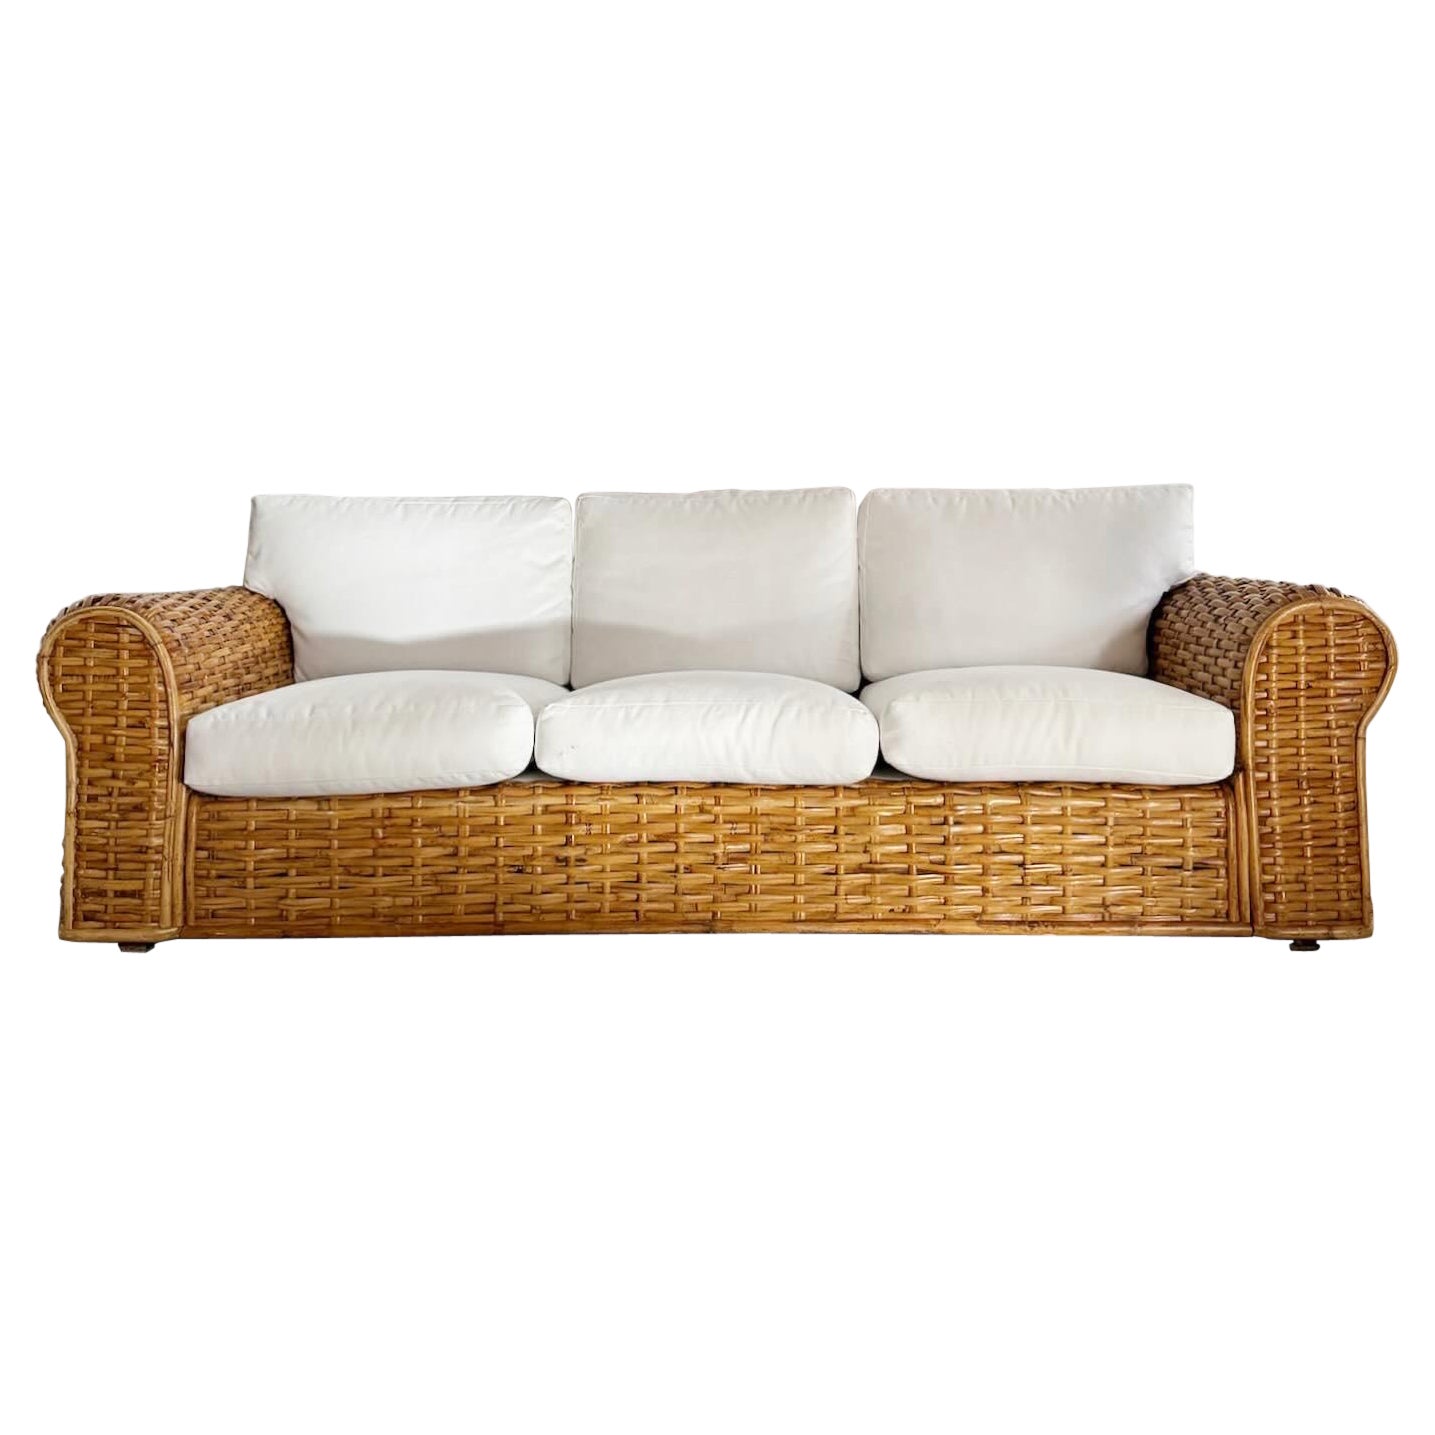 Boho Chic Wicker Sofa With White Cushions by Polo Ralph Lauren For Sale